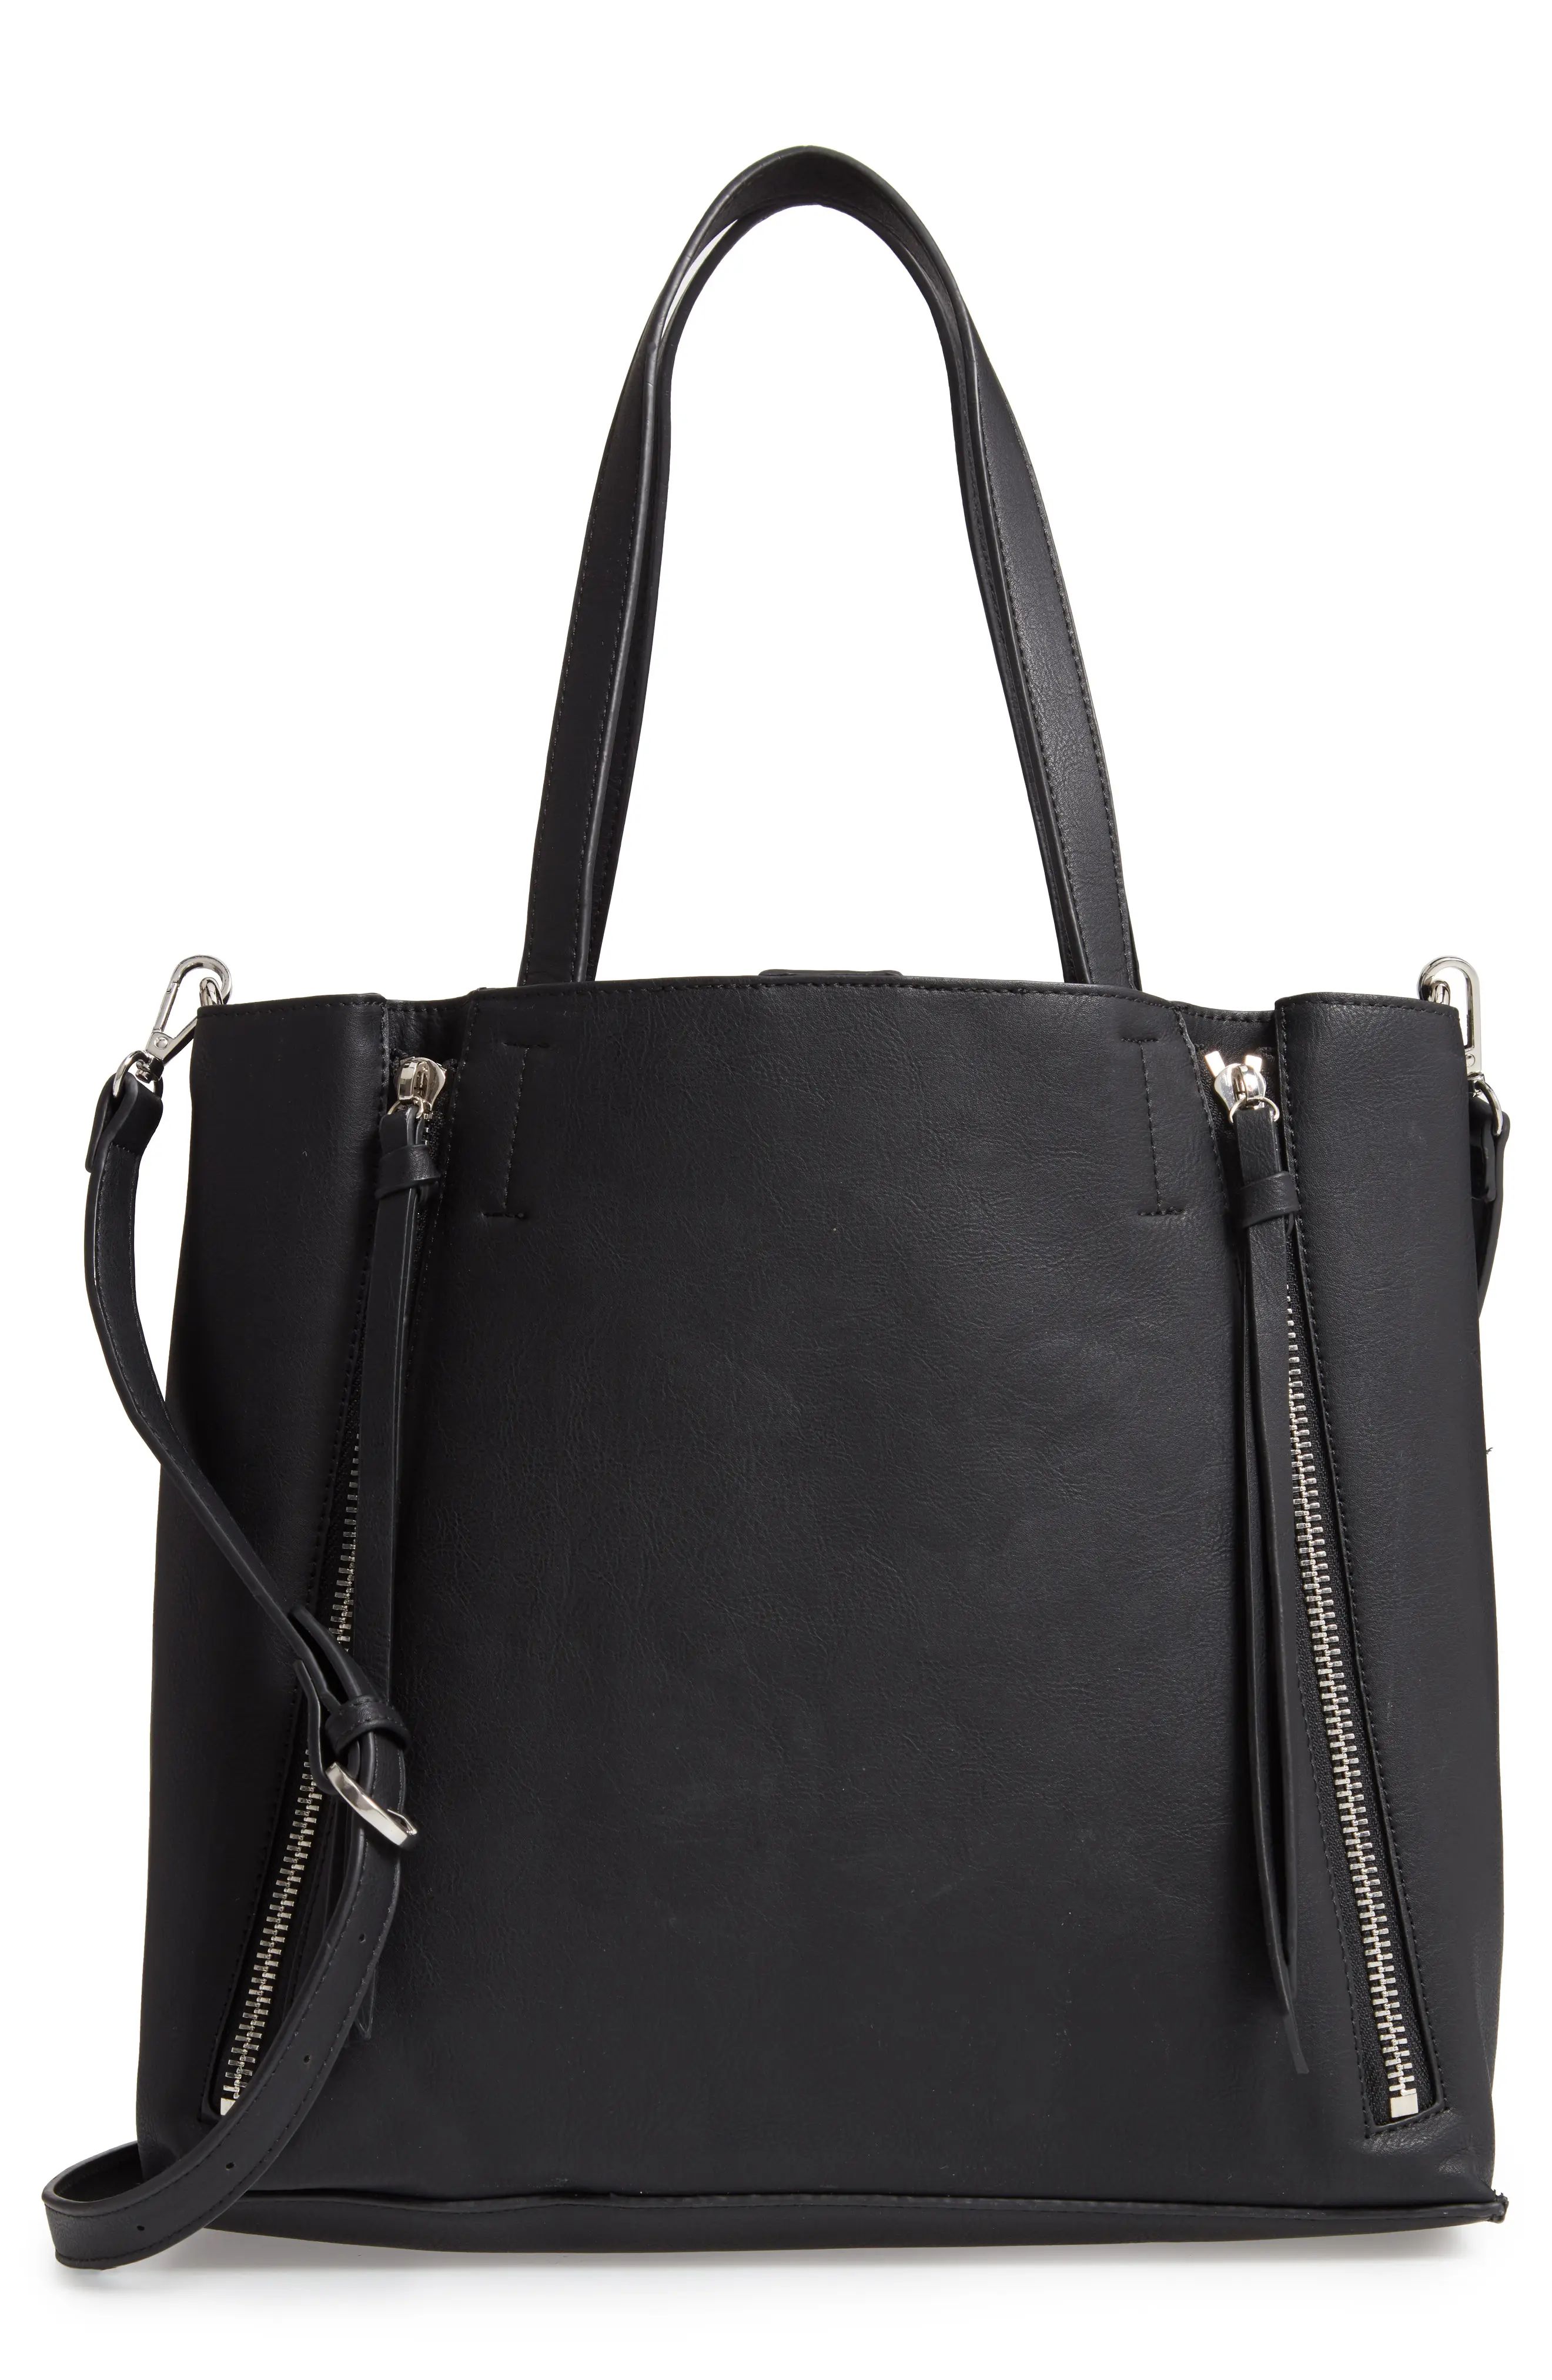 Chelsea28 Leigh Convertible Zipper Faux Leather Tote | Nordstrom